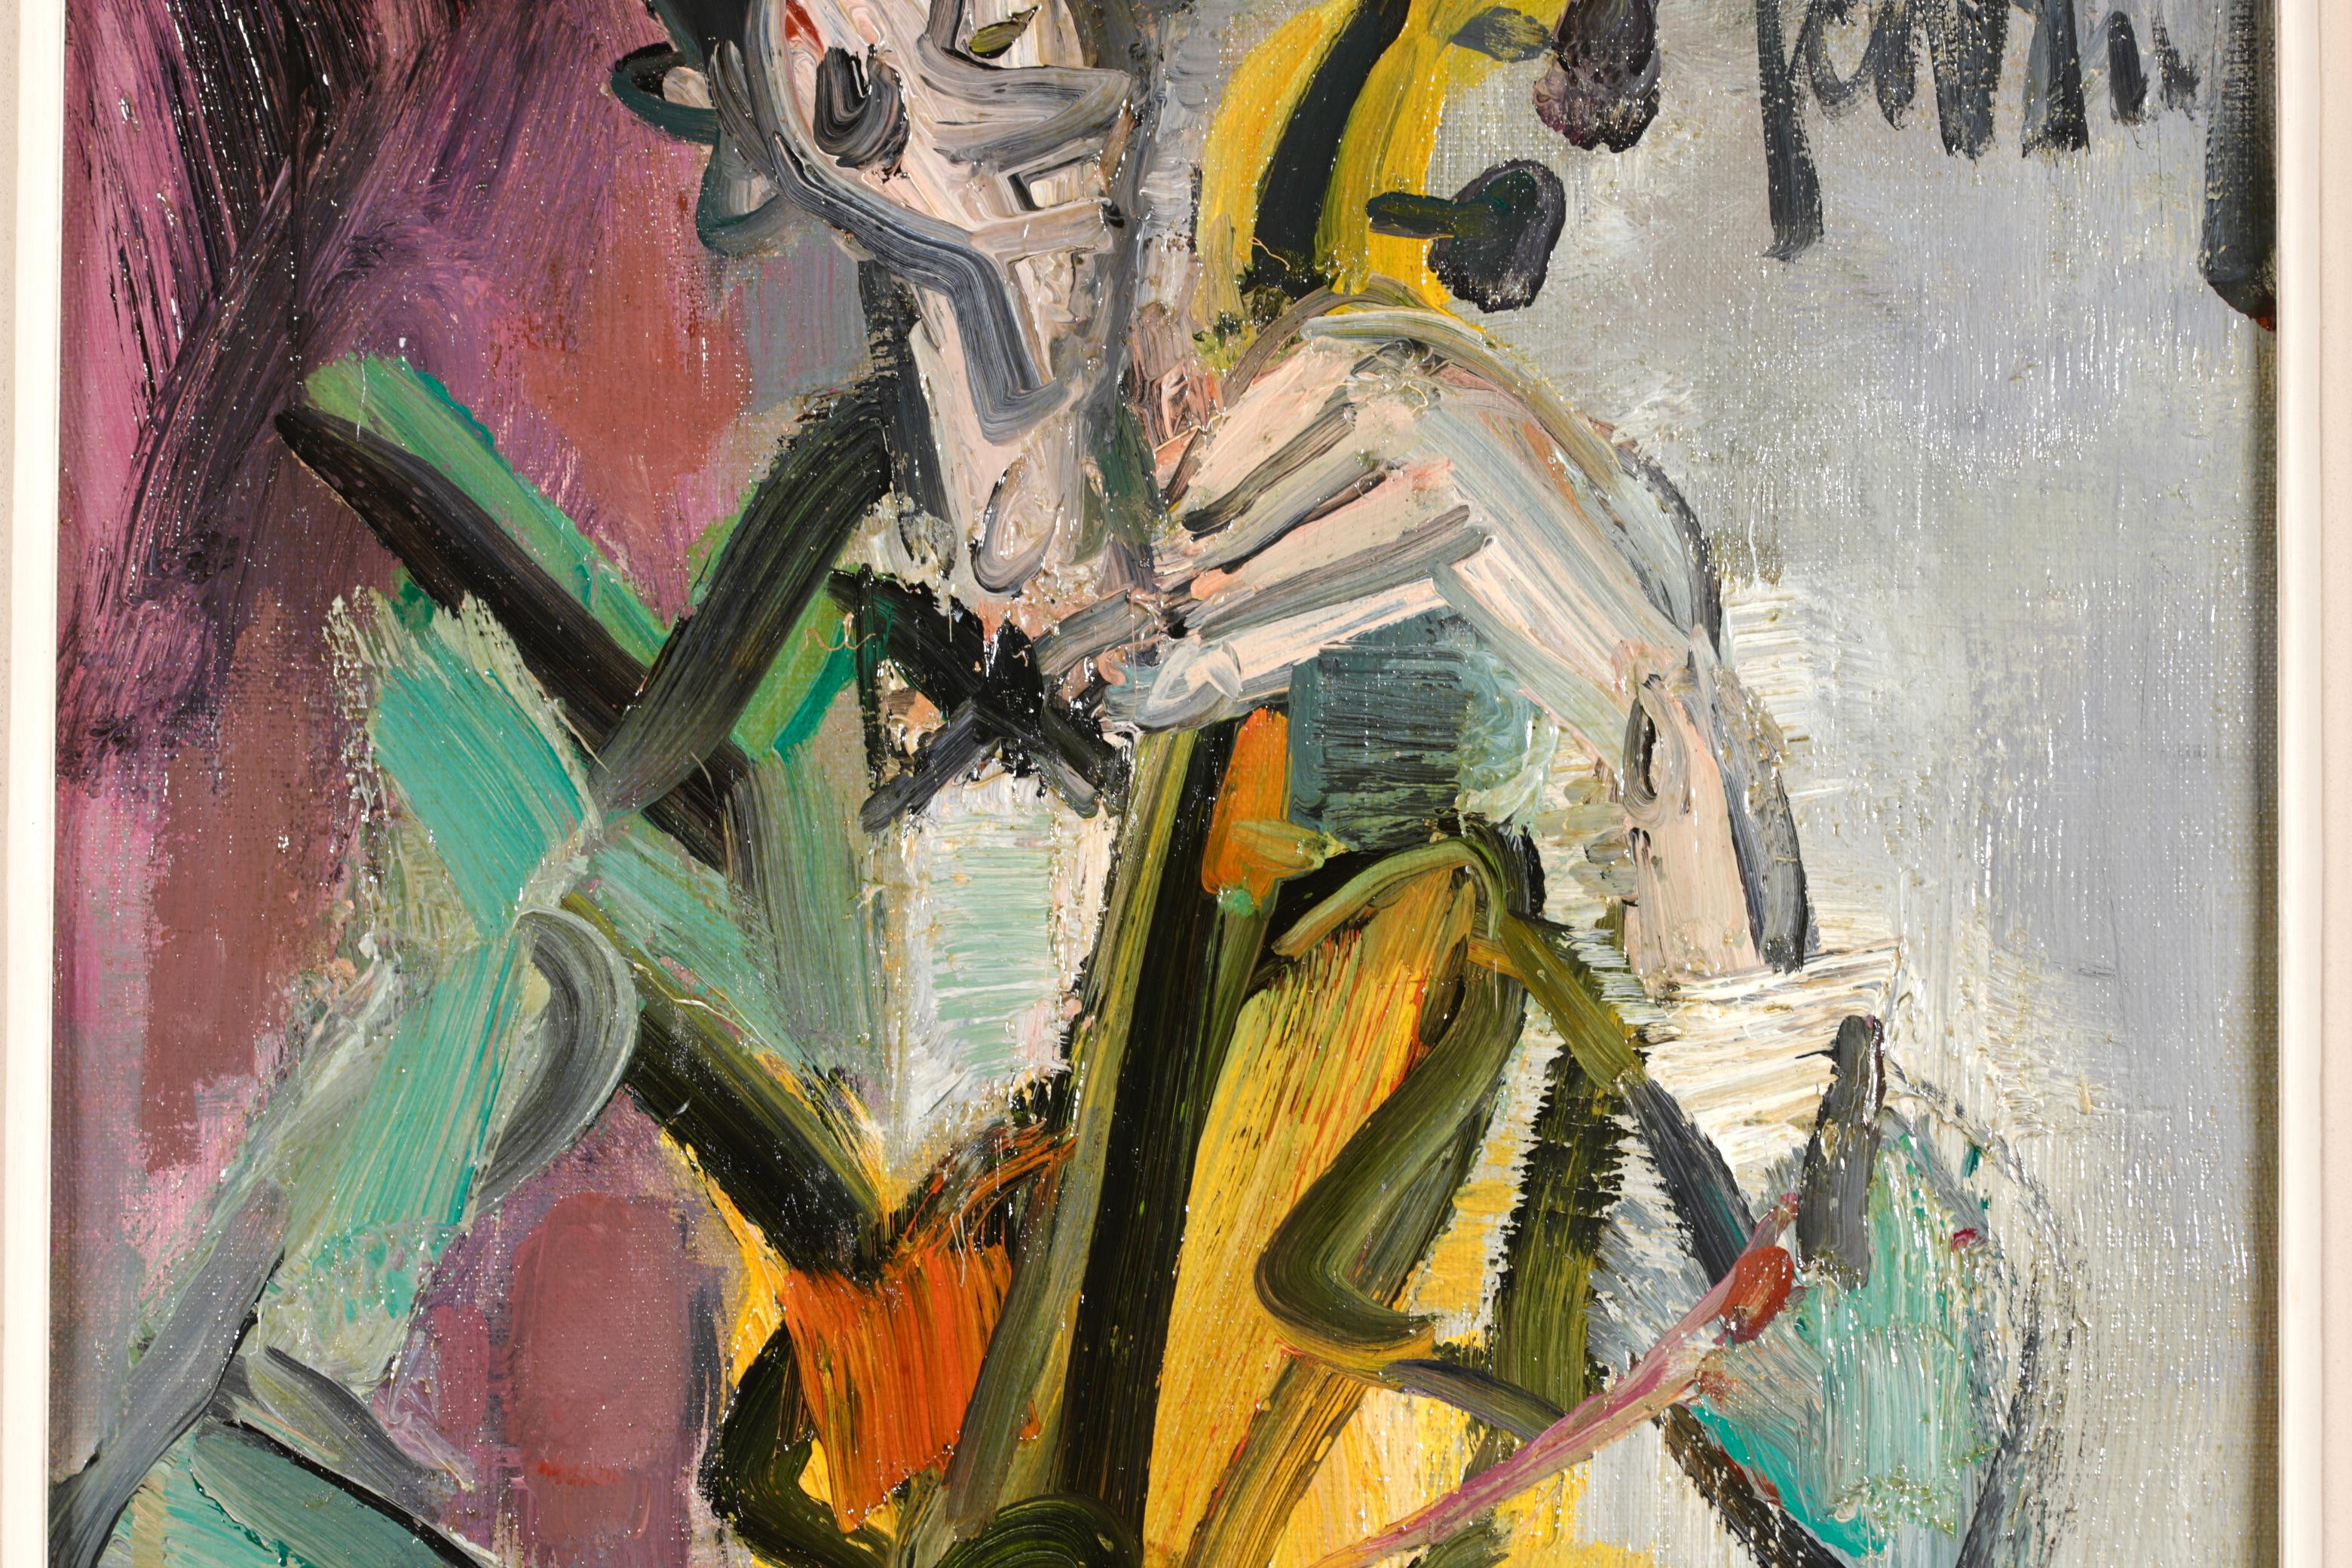 Signed expressionist oil on canvas portrait by French painter and engraver Gen Paul. This charming work depicts a seated musician wearing a green suit with a black bow tie playing the double bass. This beautiful example of Gen Paul's work dates to